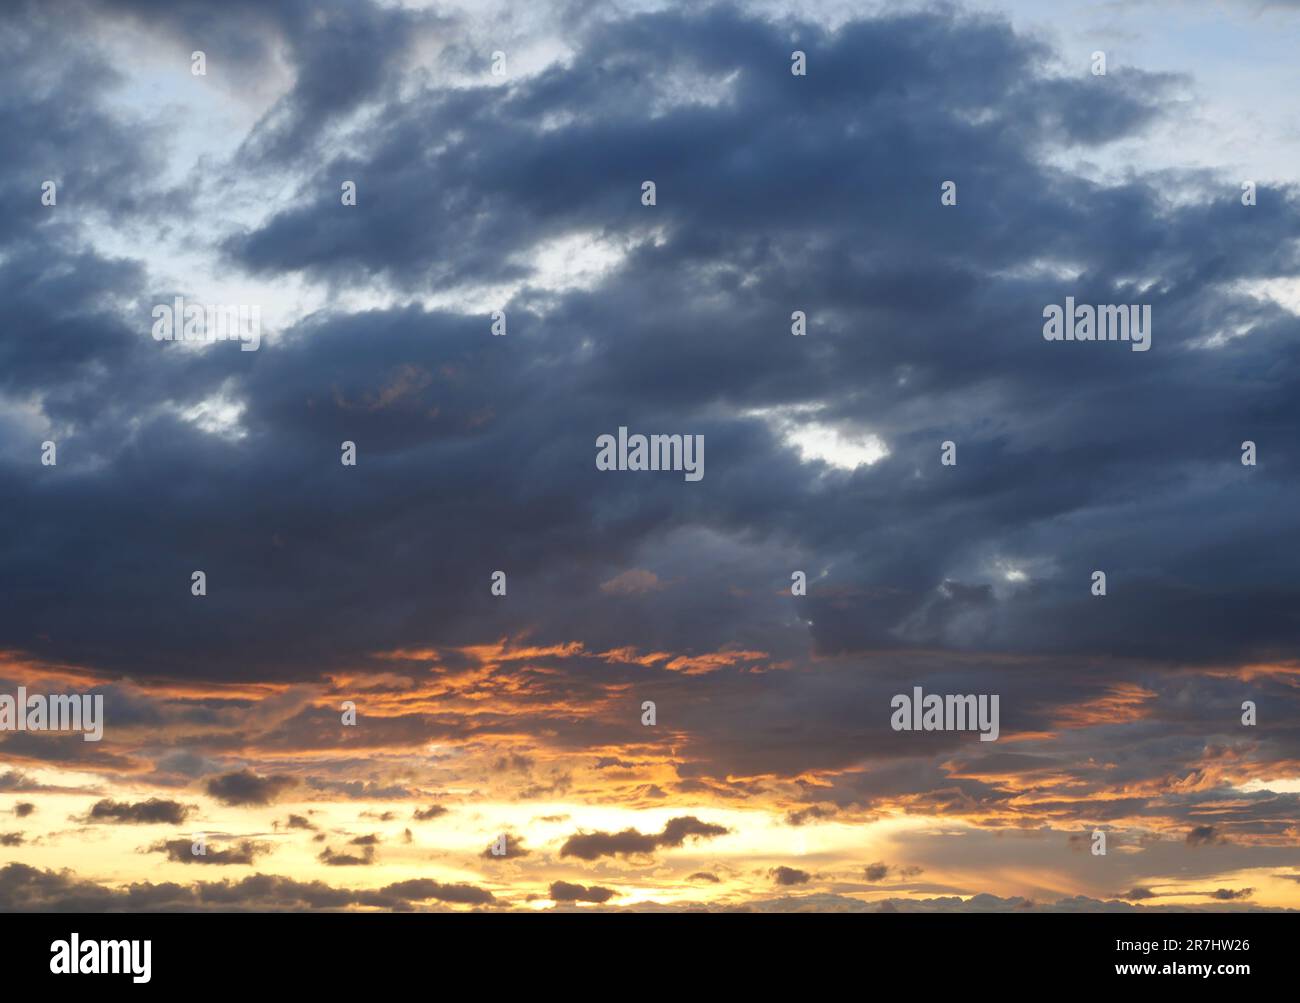 Cloud and blue sky in magic hour at sunset, The horizon began to turn orange with purple cloud at night, Dramatic cloudscape area Stock Photo